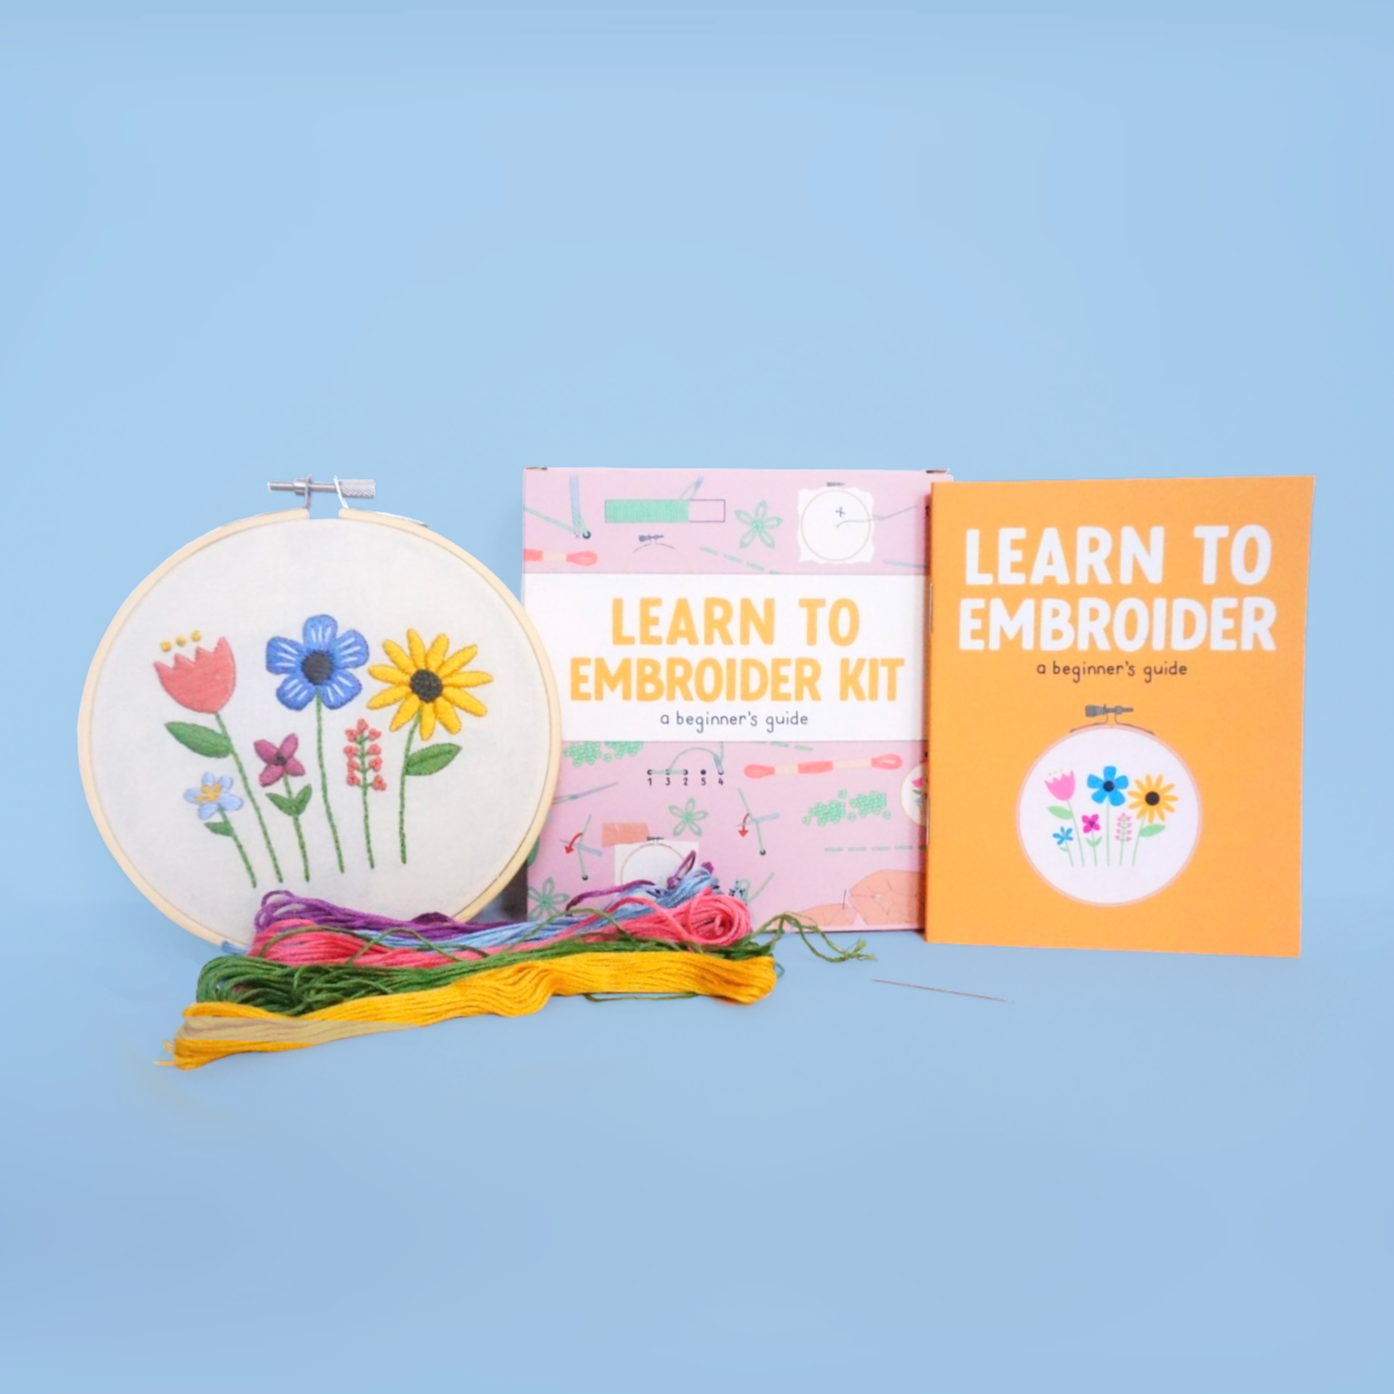 Machine Embroidery Basics  Your Complete Beginner's Guide